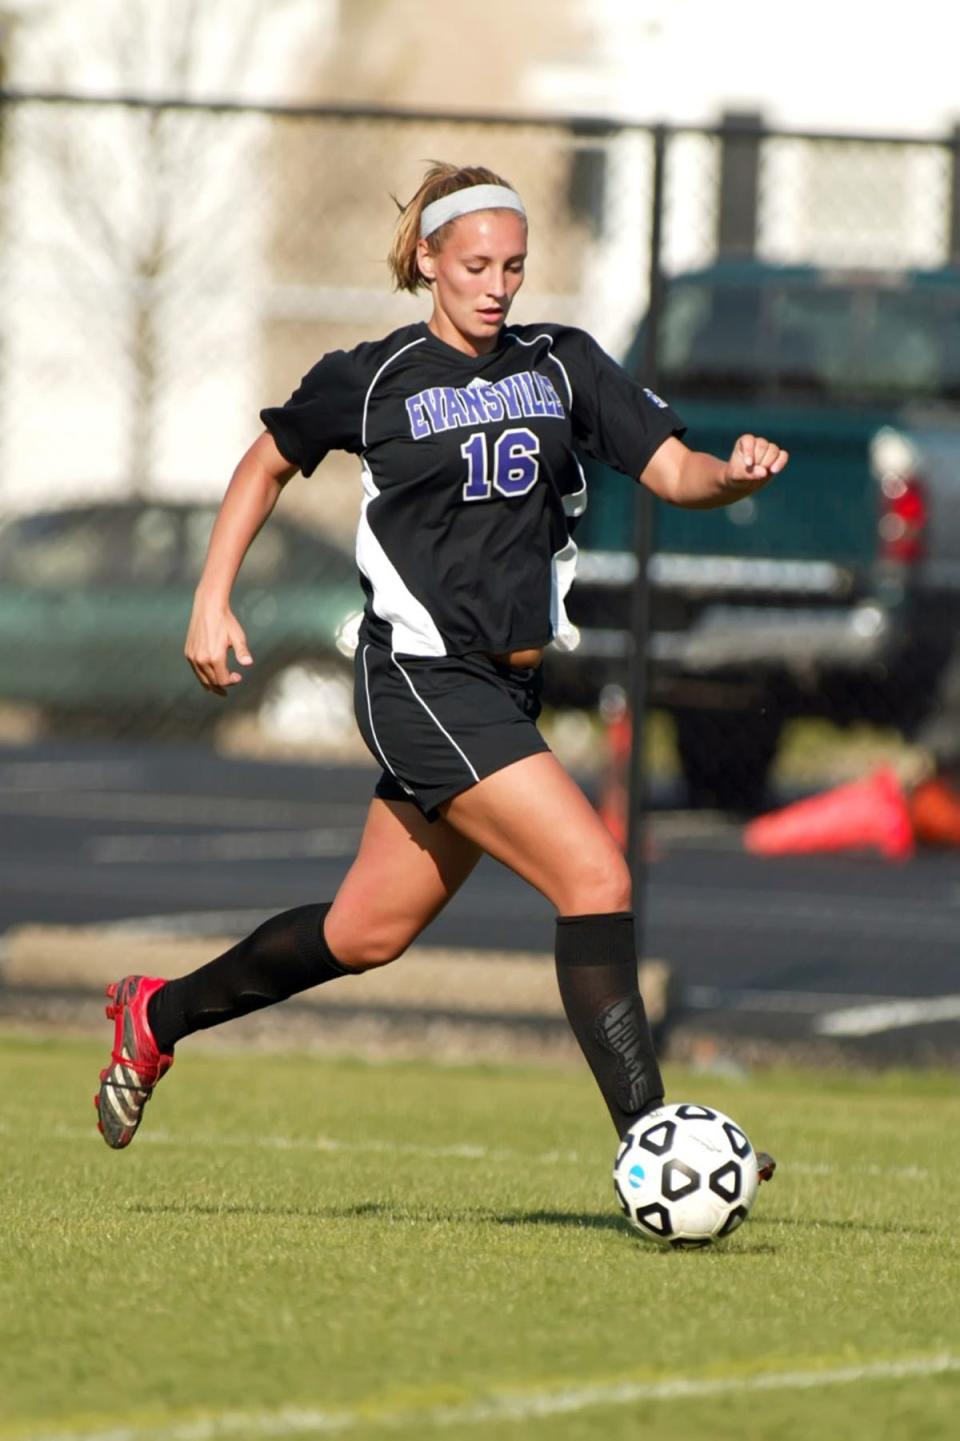 Nicole Zygmontowicz, now Nicole Reilly, was one of Kitsap County's best all around female athletes before playing college soccer at the University of Evansville. She's part of the 2022 Kitsap Sports Hall of Fame class being inducted on Jan. 28 at Kiana Lodge.